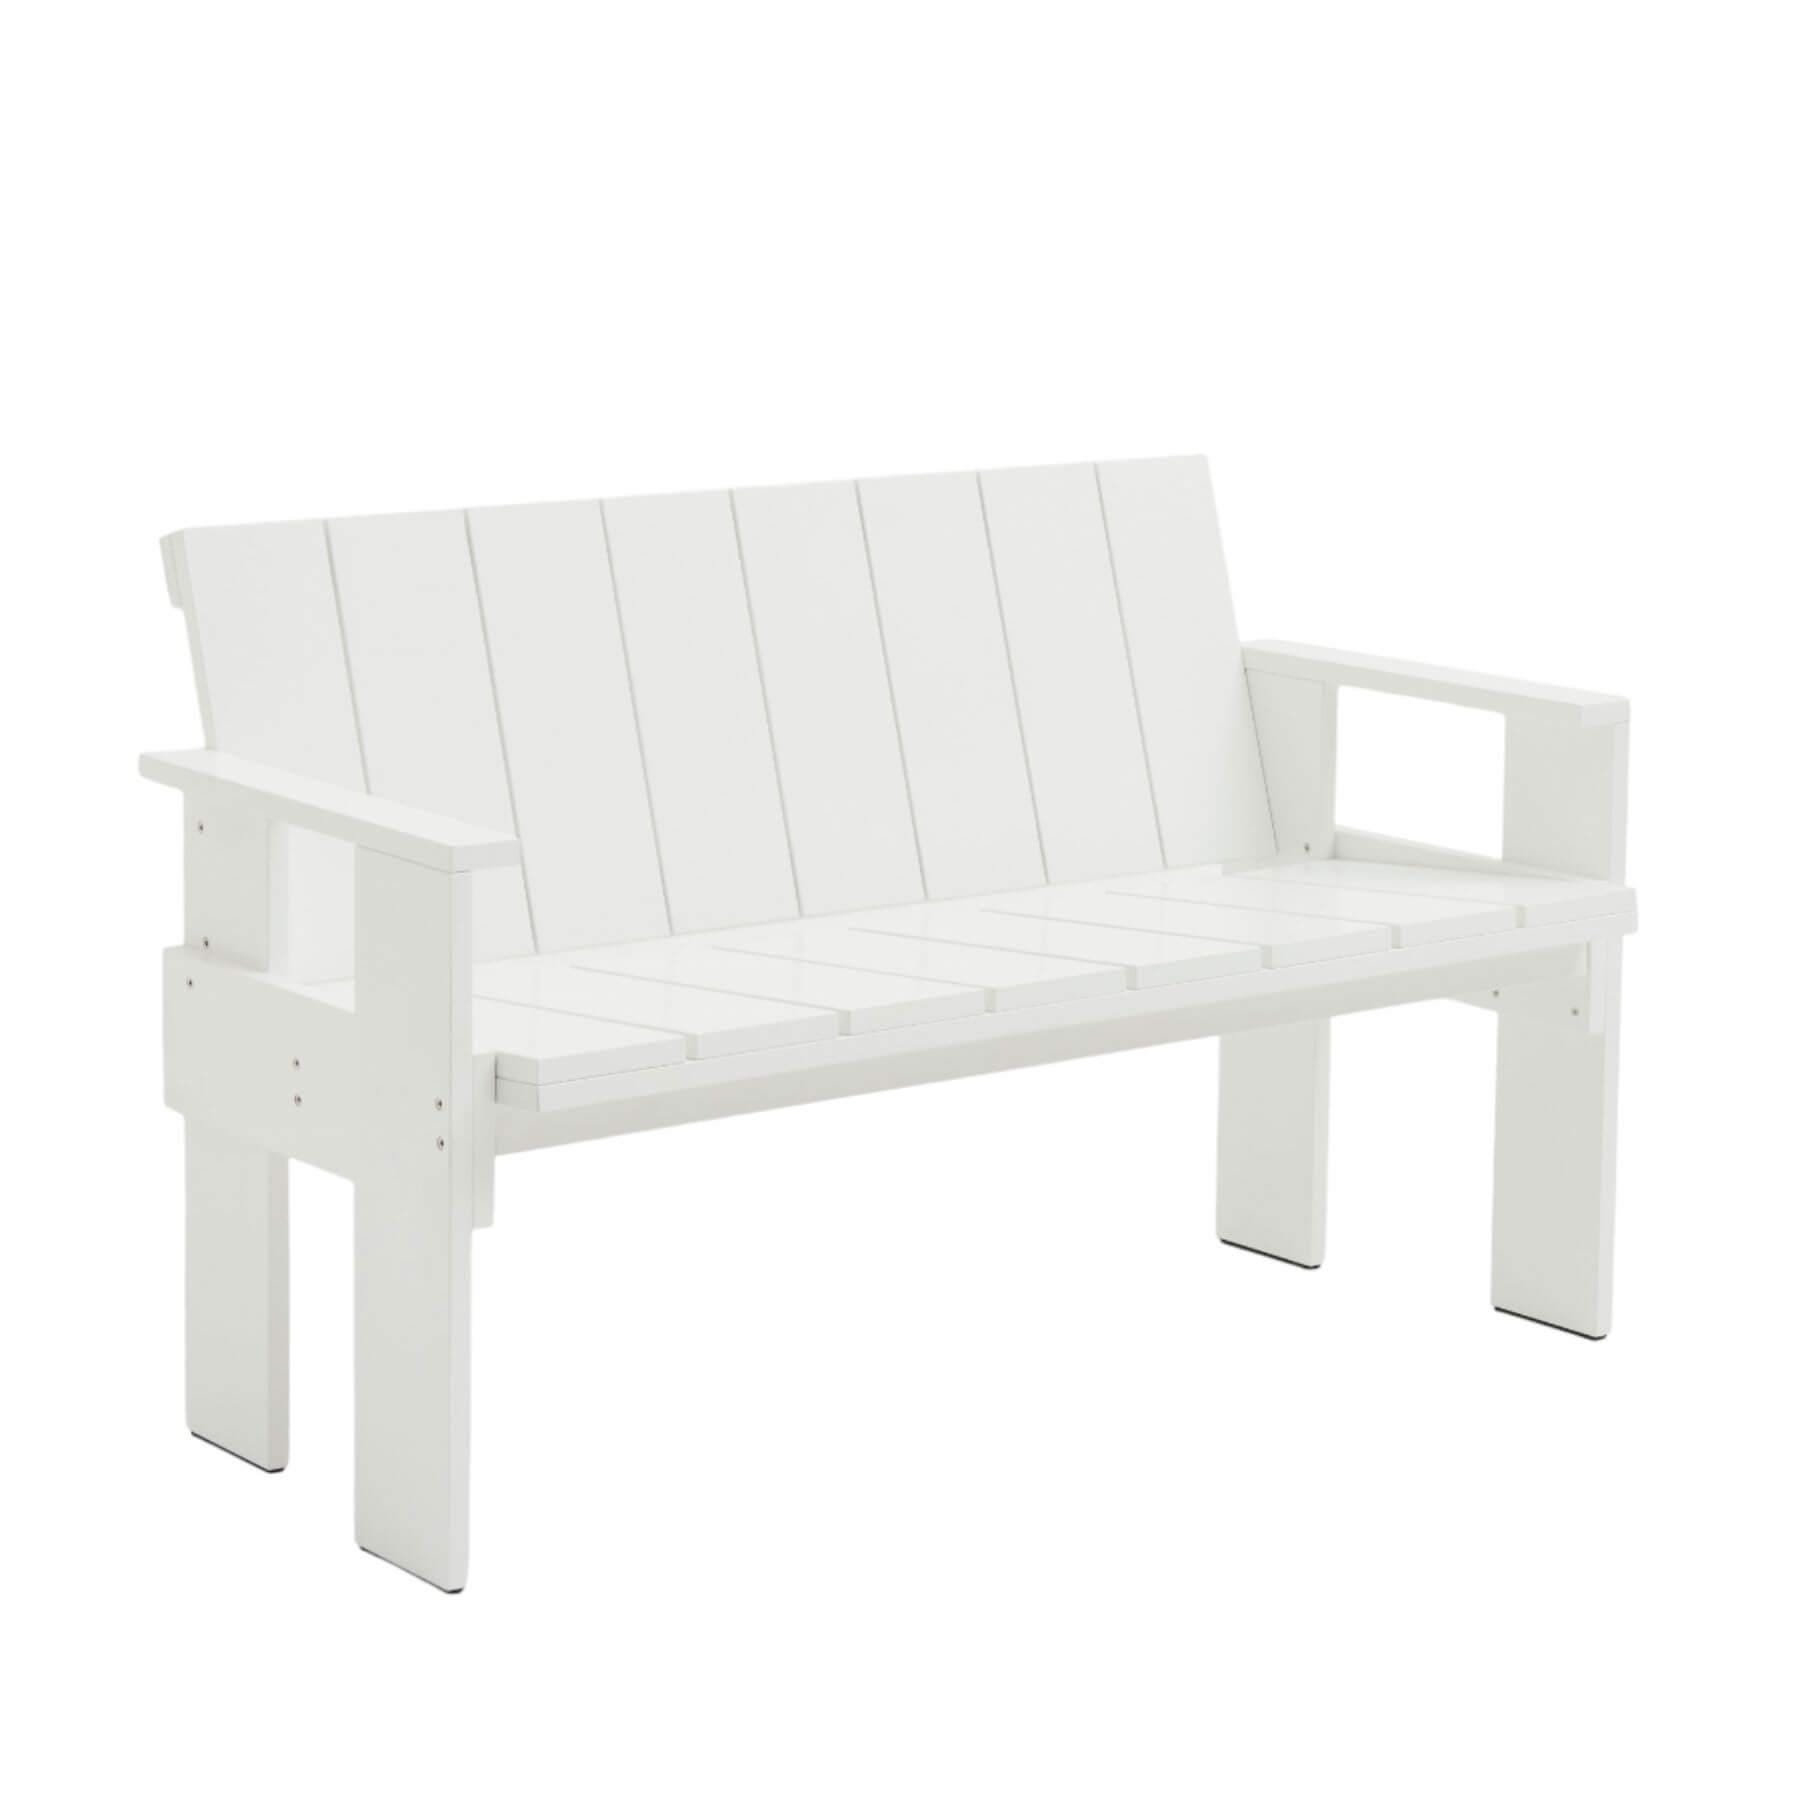 Hay Crate Dining Bench White Designer Furniture From Holloways Of Ludlow